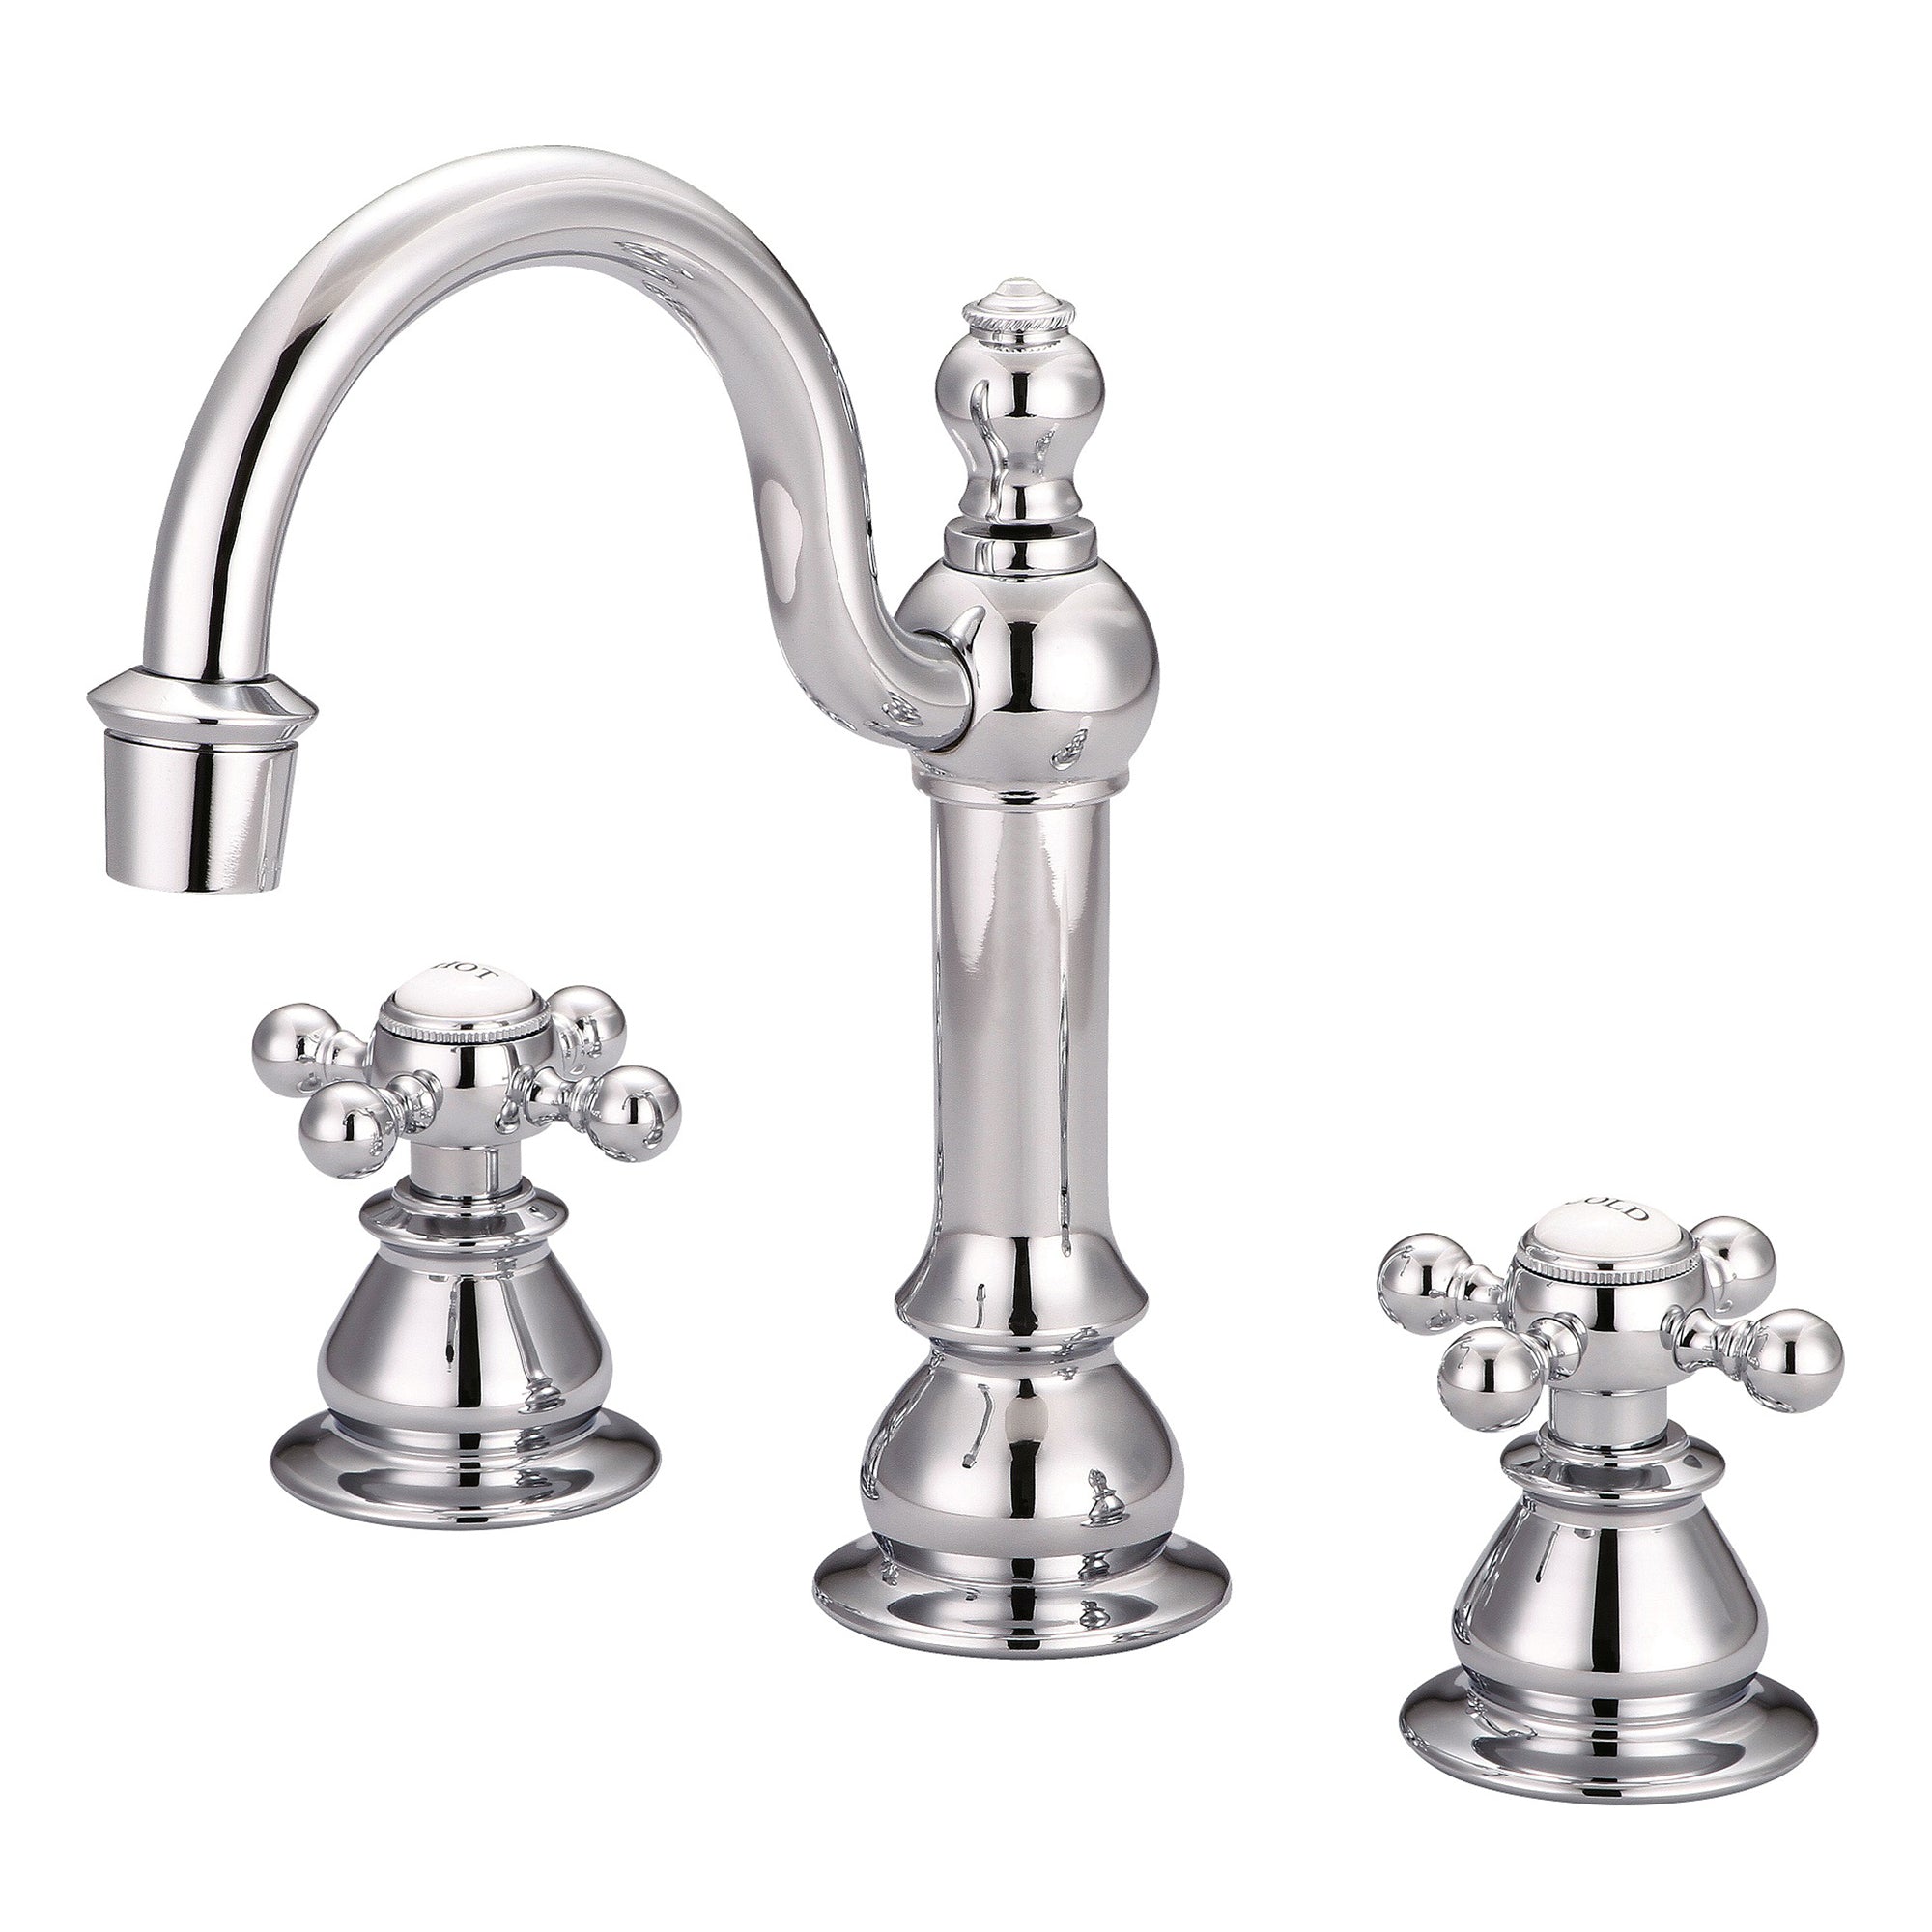 Water Creation | American 20th Century Classic Widespread Lavatory F2-0012 Faucets With Pop-Up Drain in Chrome Finish With Metal Lever Handles, Hot And Cold Labels Included | F2-0012-01-BX